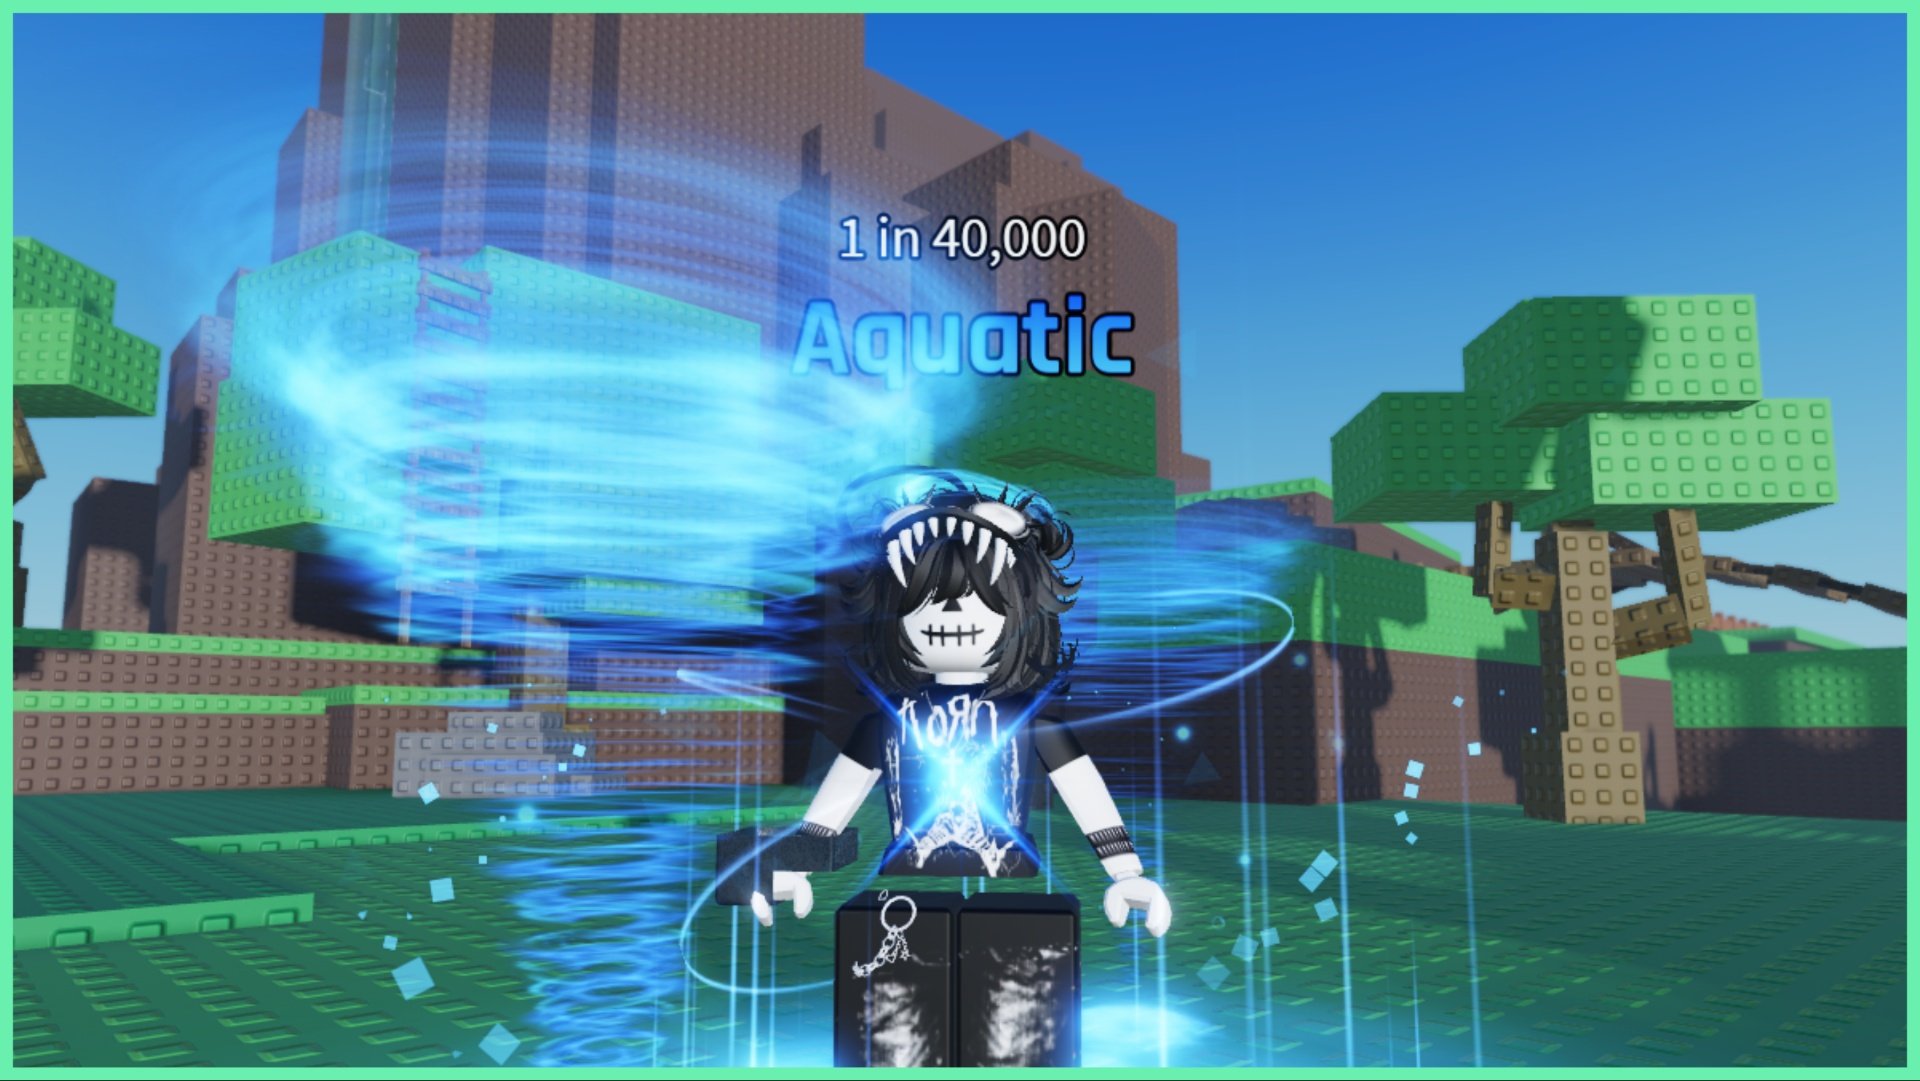 The image shows my avatar during the daytime on the main island of sols rng which is full of greenery and distant cliffs. My avatar has the aquatic aura which is two wirlpools of blue water which dances around her in a circle